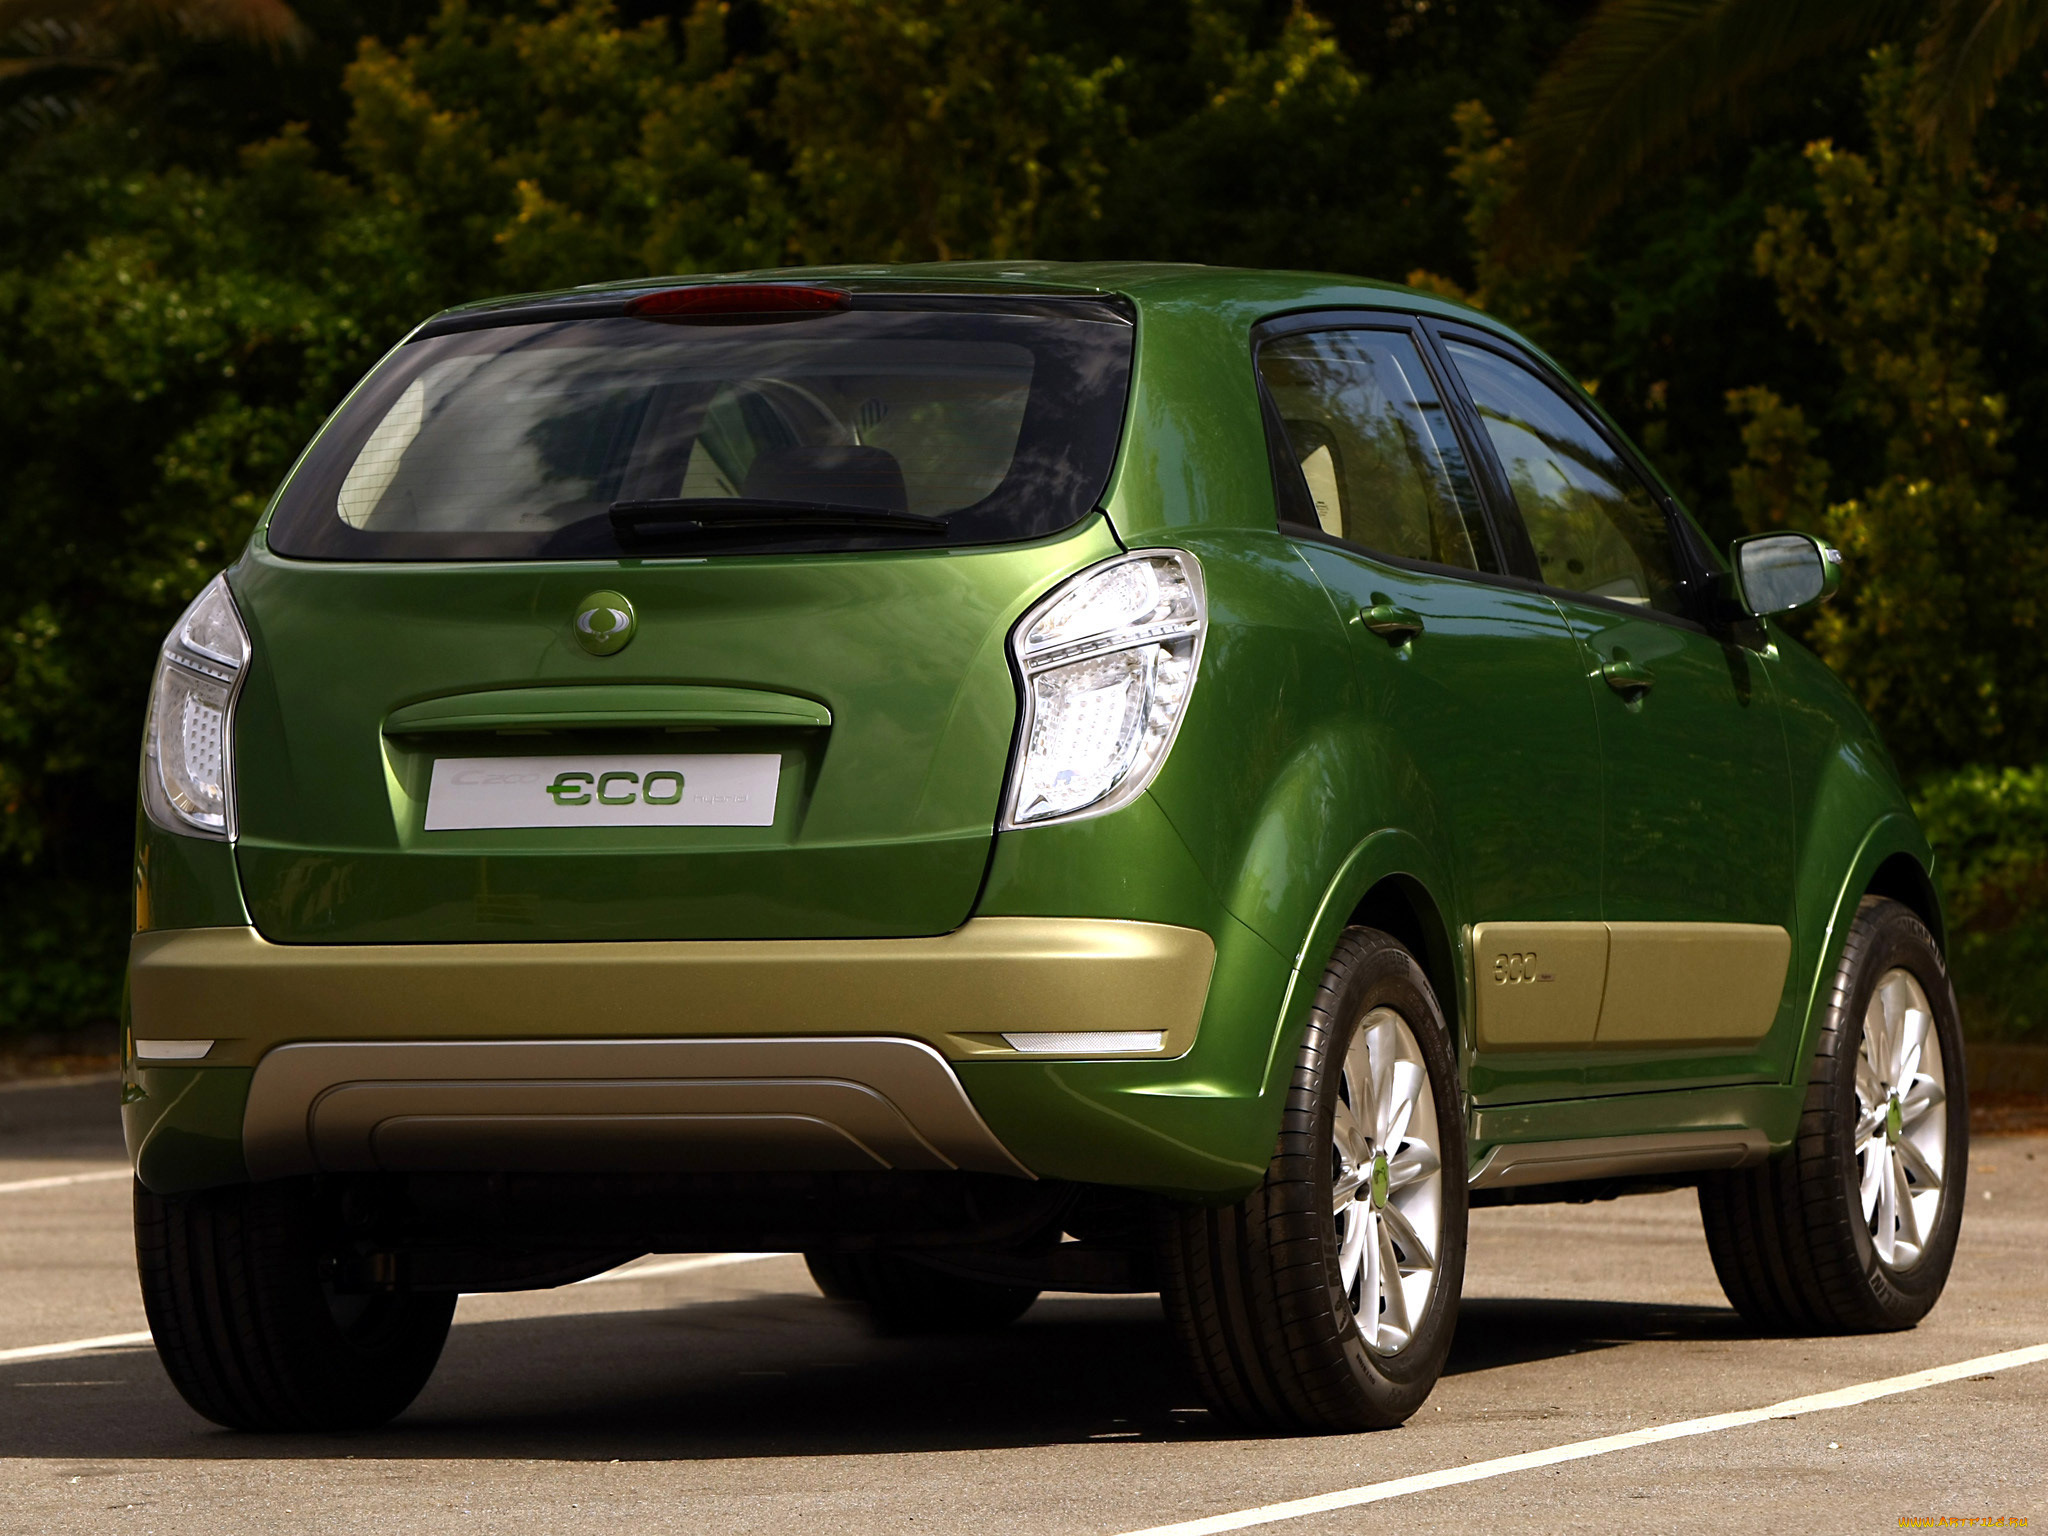 ssang, yong, c200, eco, hybrid, concept, 2009, автомобили, ssang, yong, ssang, yong, c200, eco, hybrid, concept, 2009